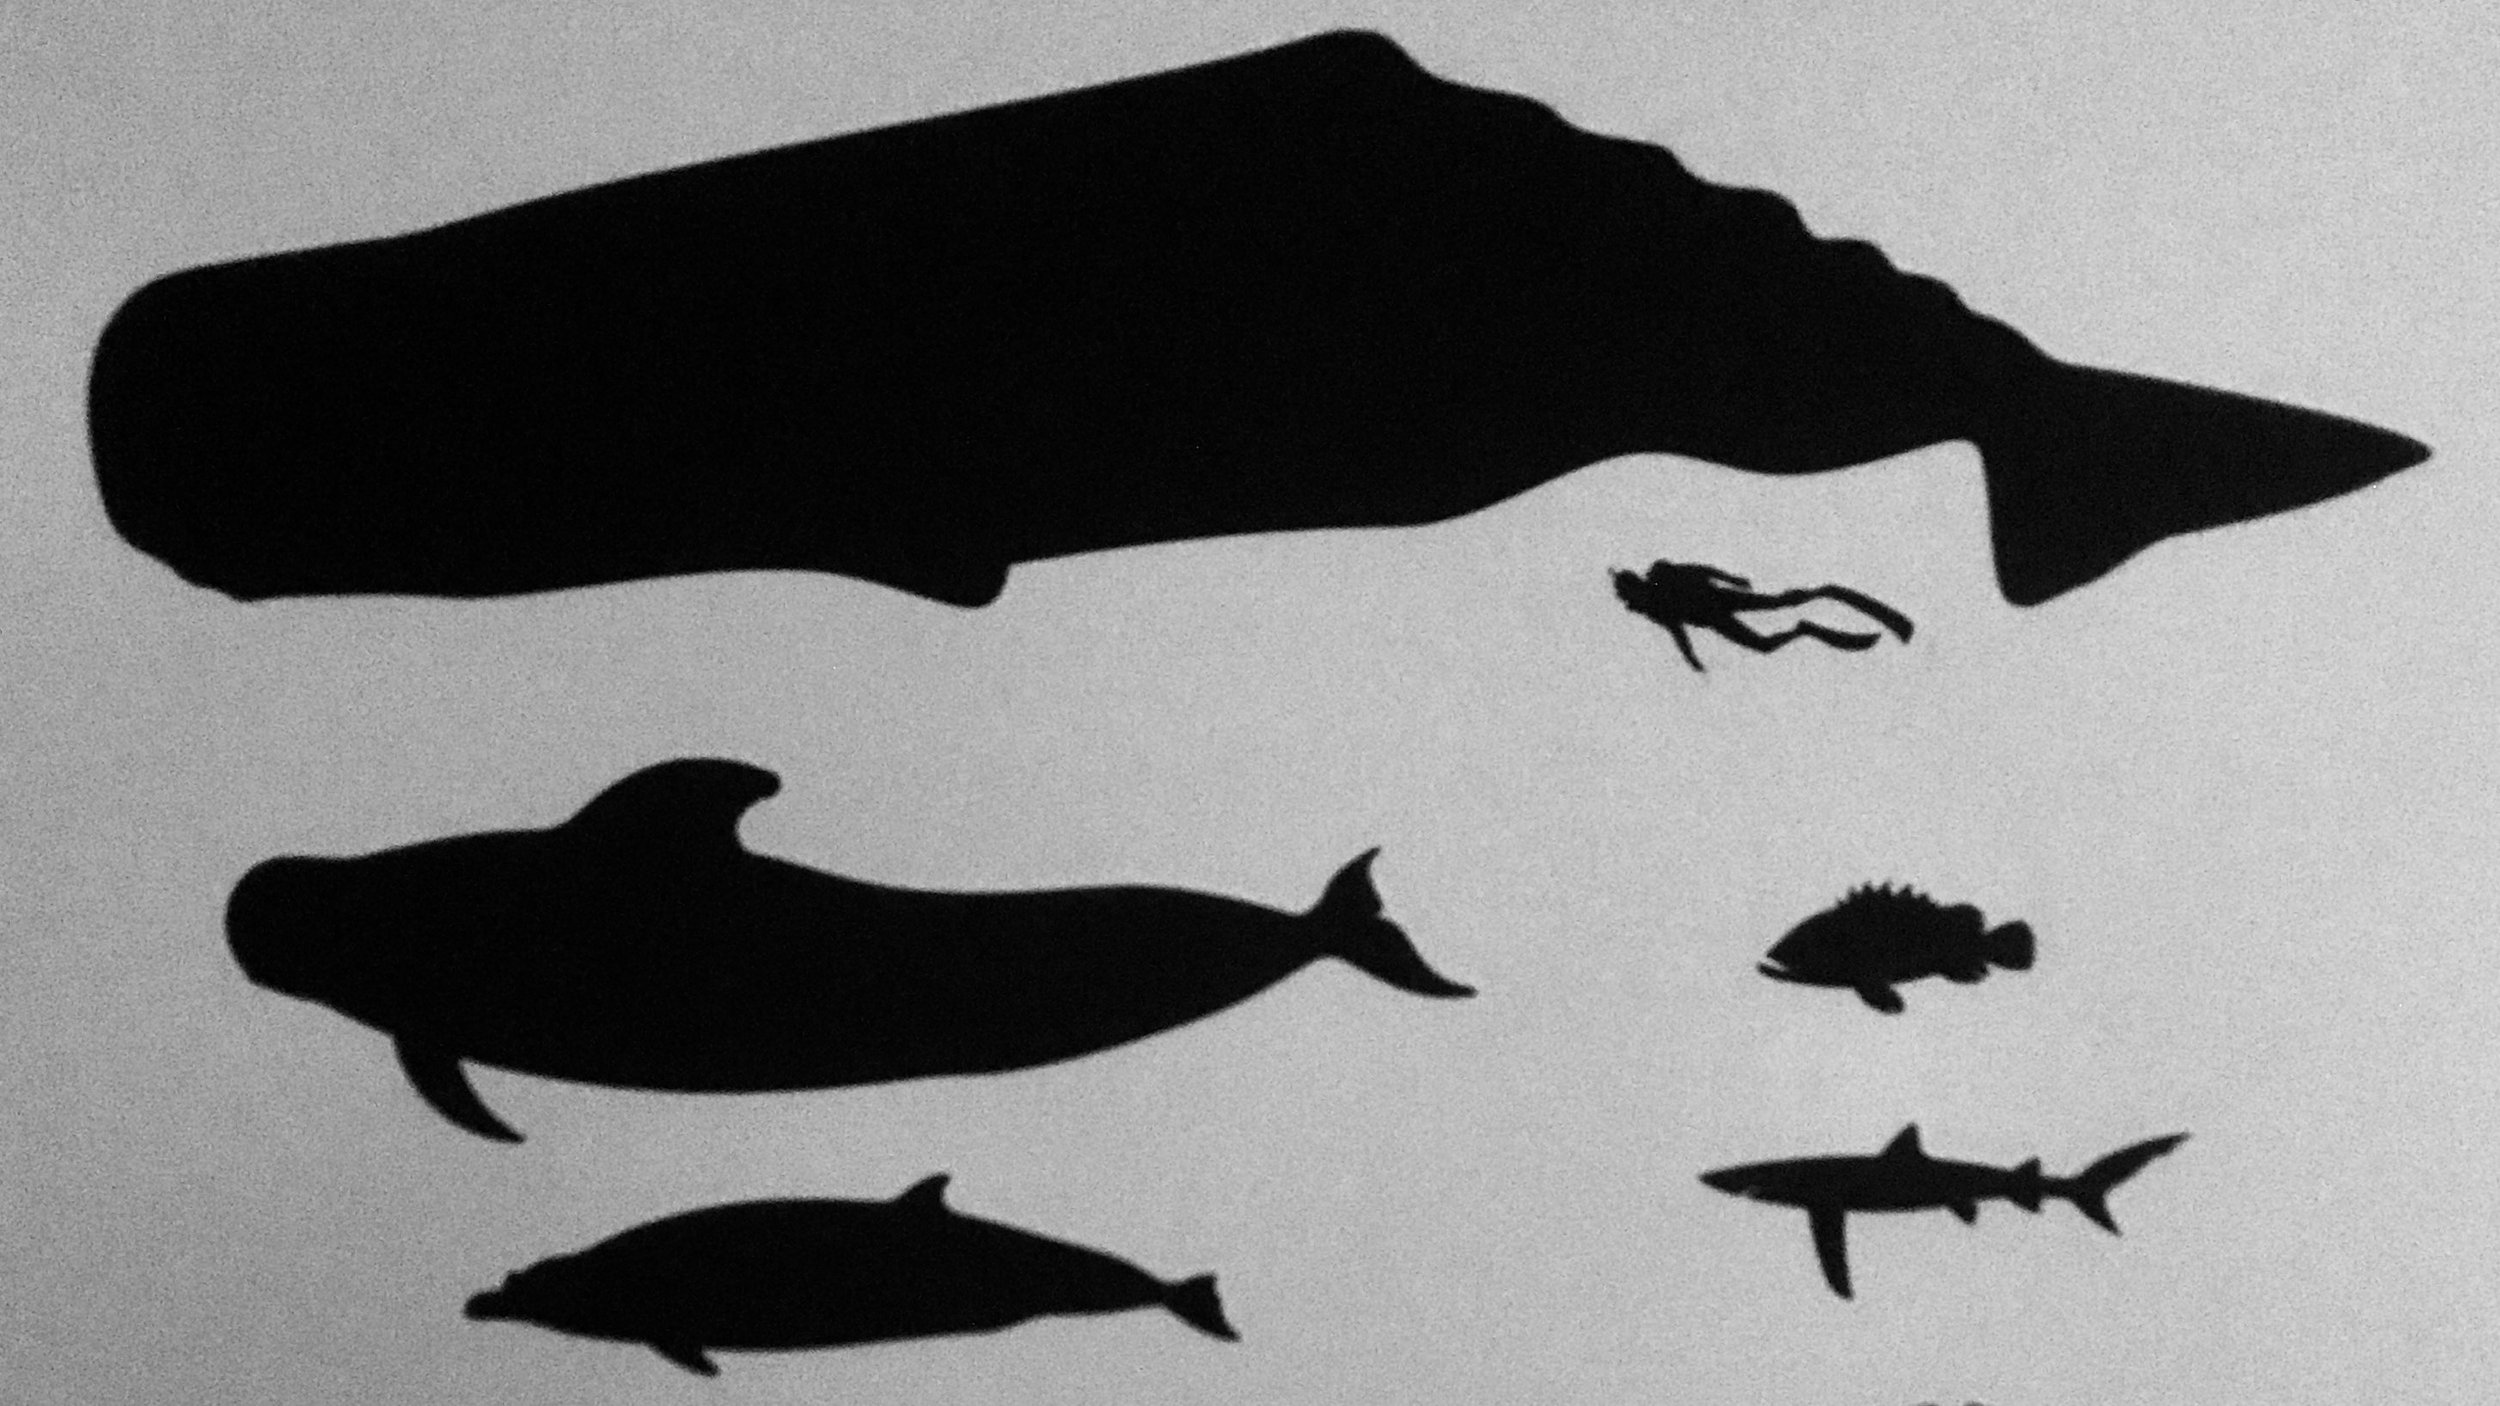 Size comparison chart showing sperm whale and human